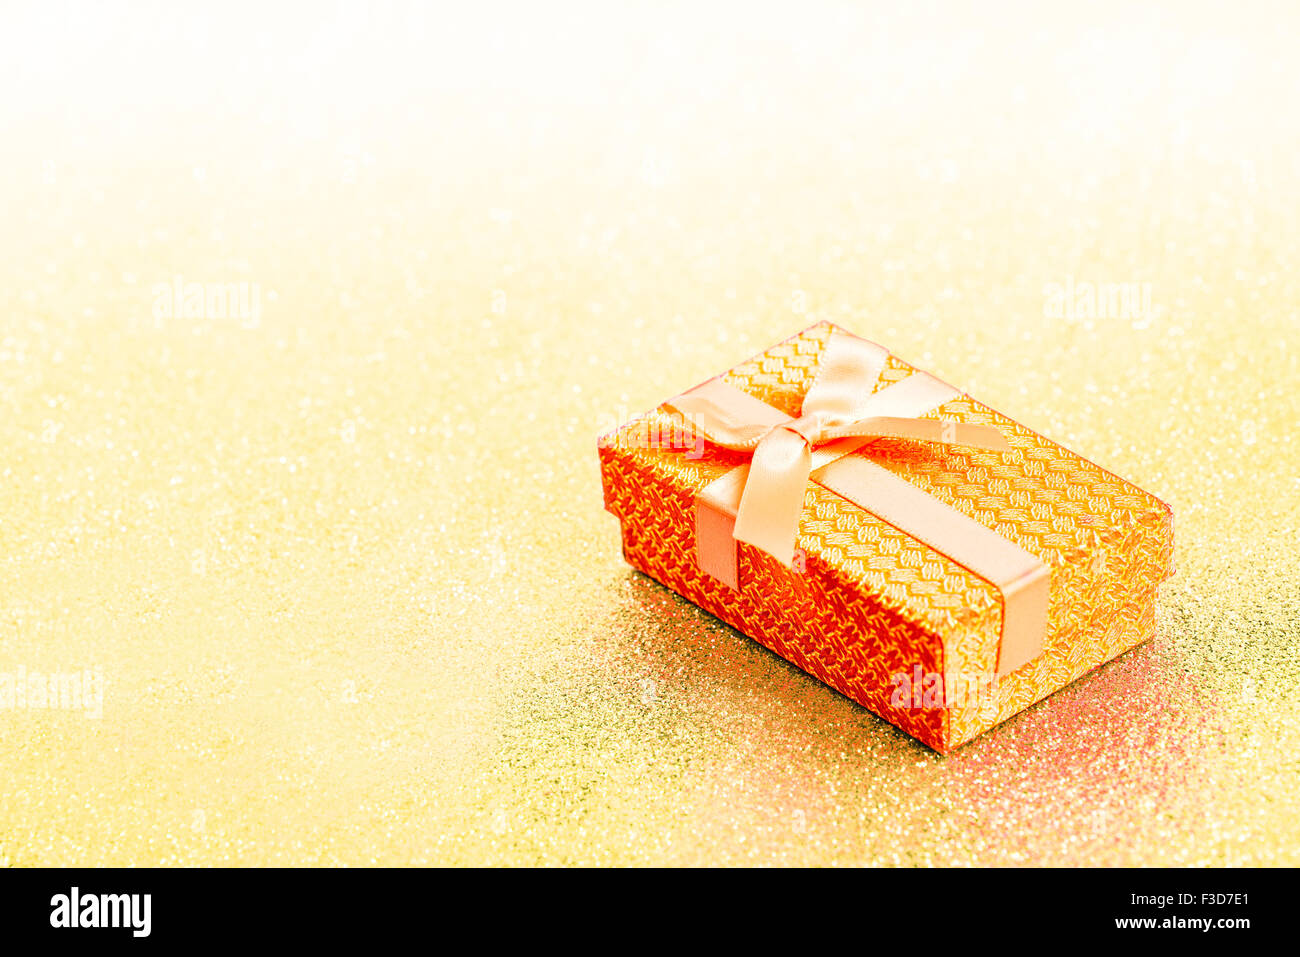 Abstract yellow golden christmas background with gift box Stock Photo